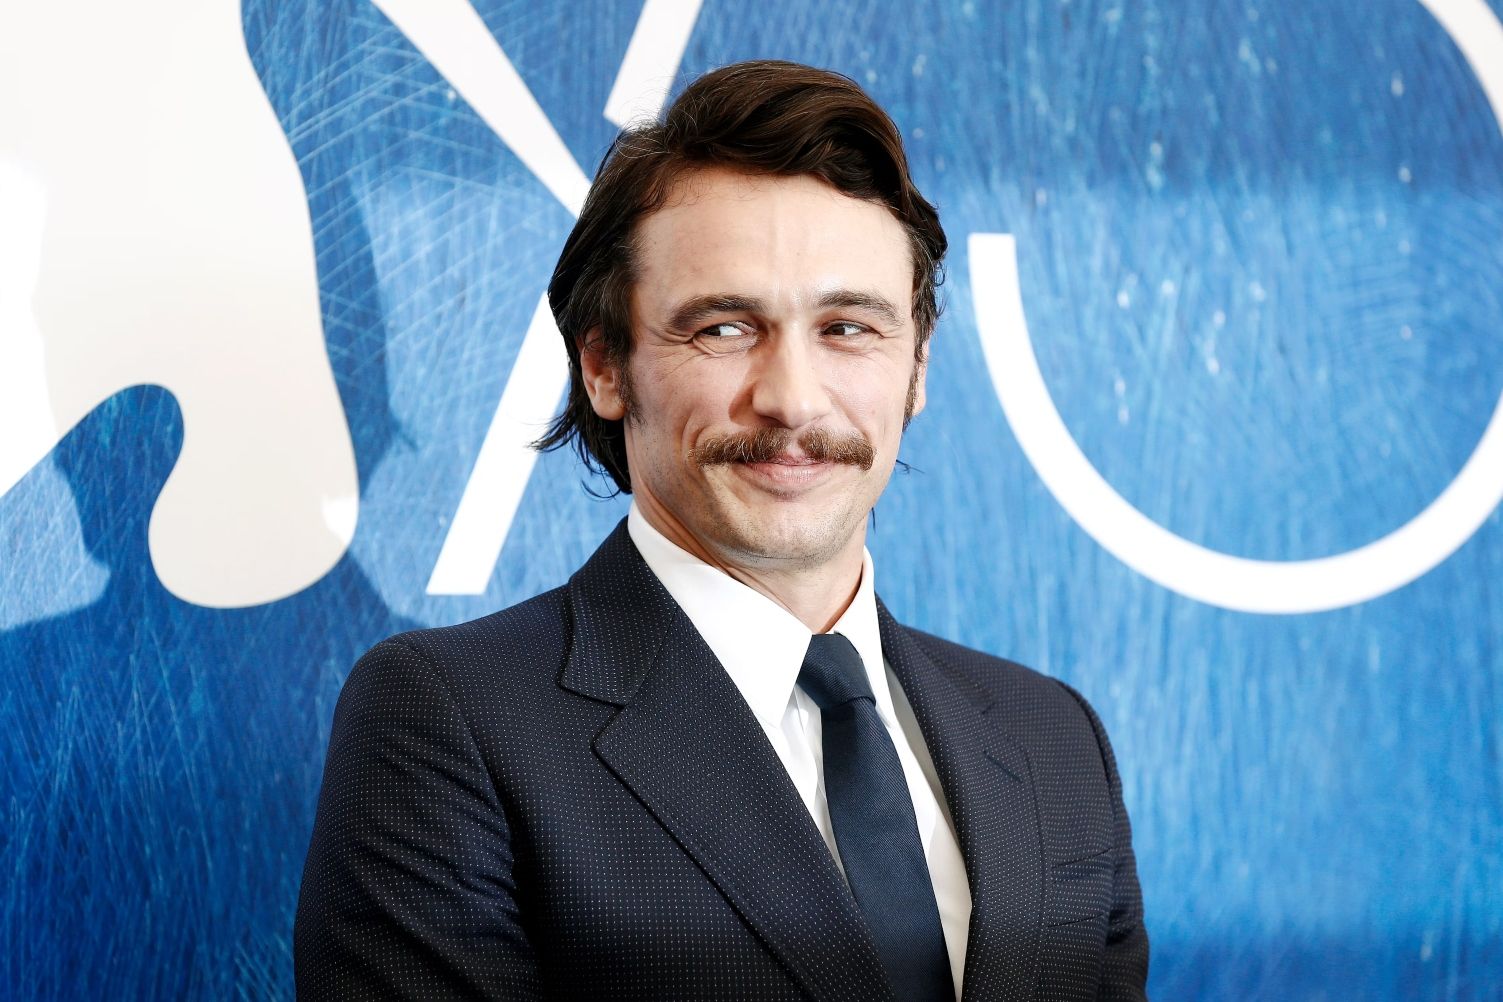 James Franco attends the photo-call of 'In Dubious Battle' during the 73rd Venice Film Festival on September 3, 2016 in Venice, Italy